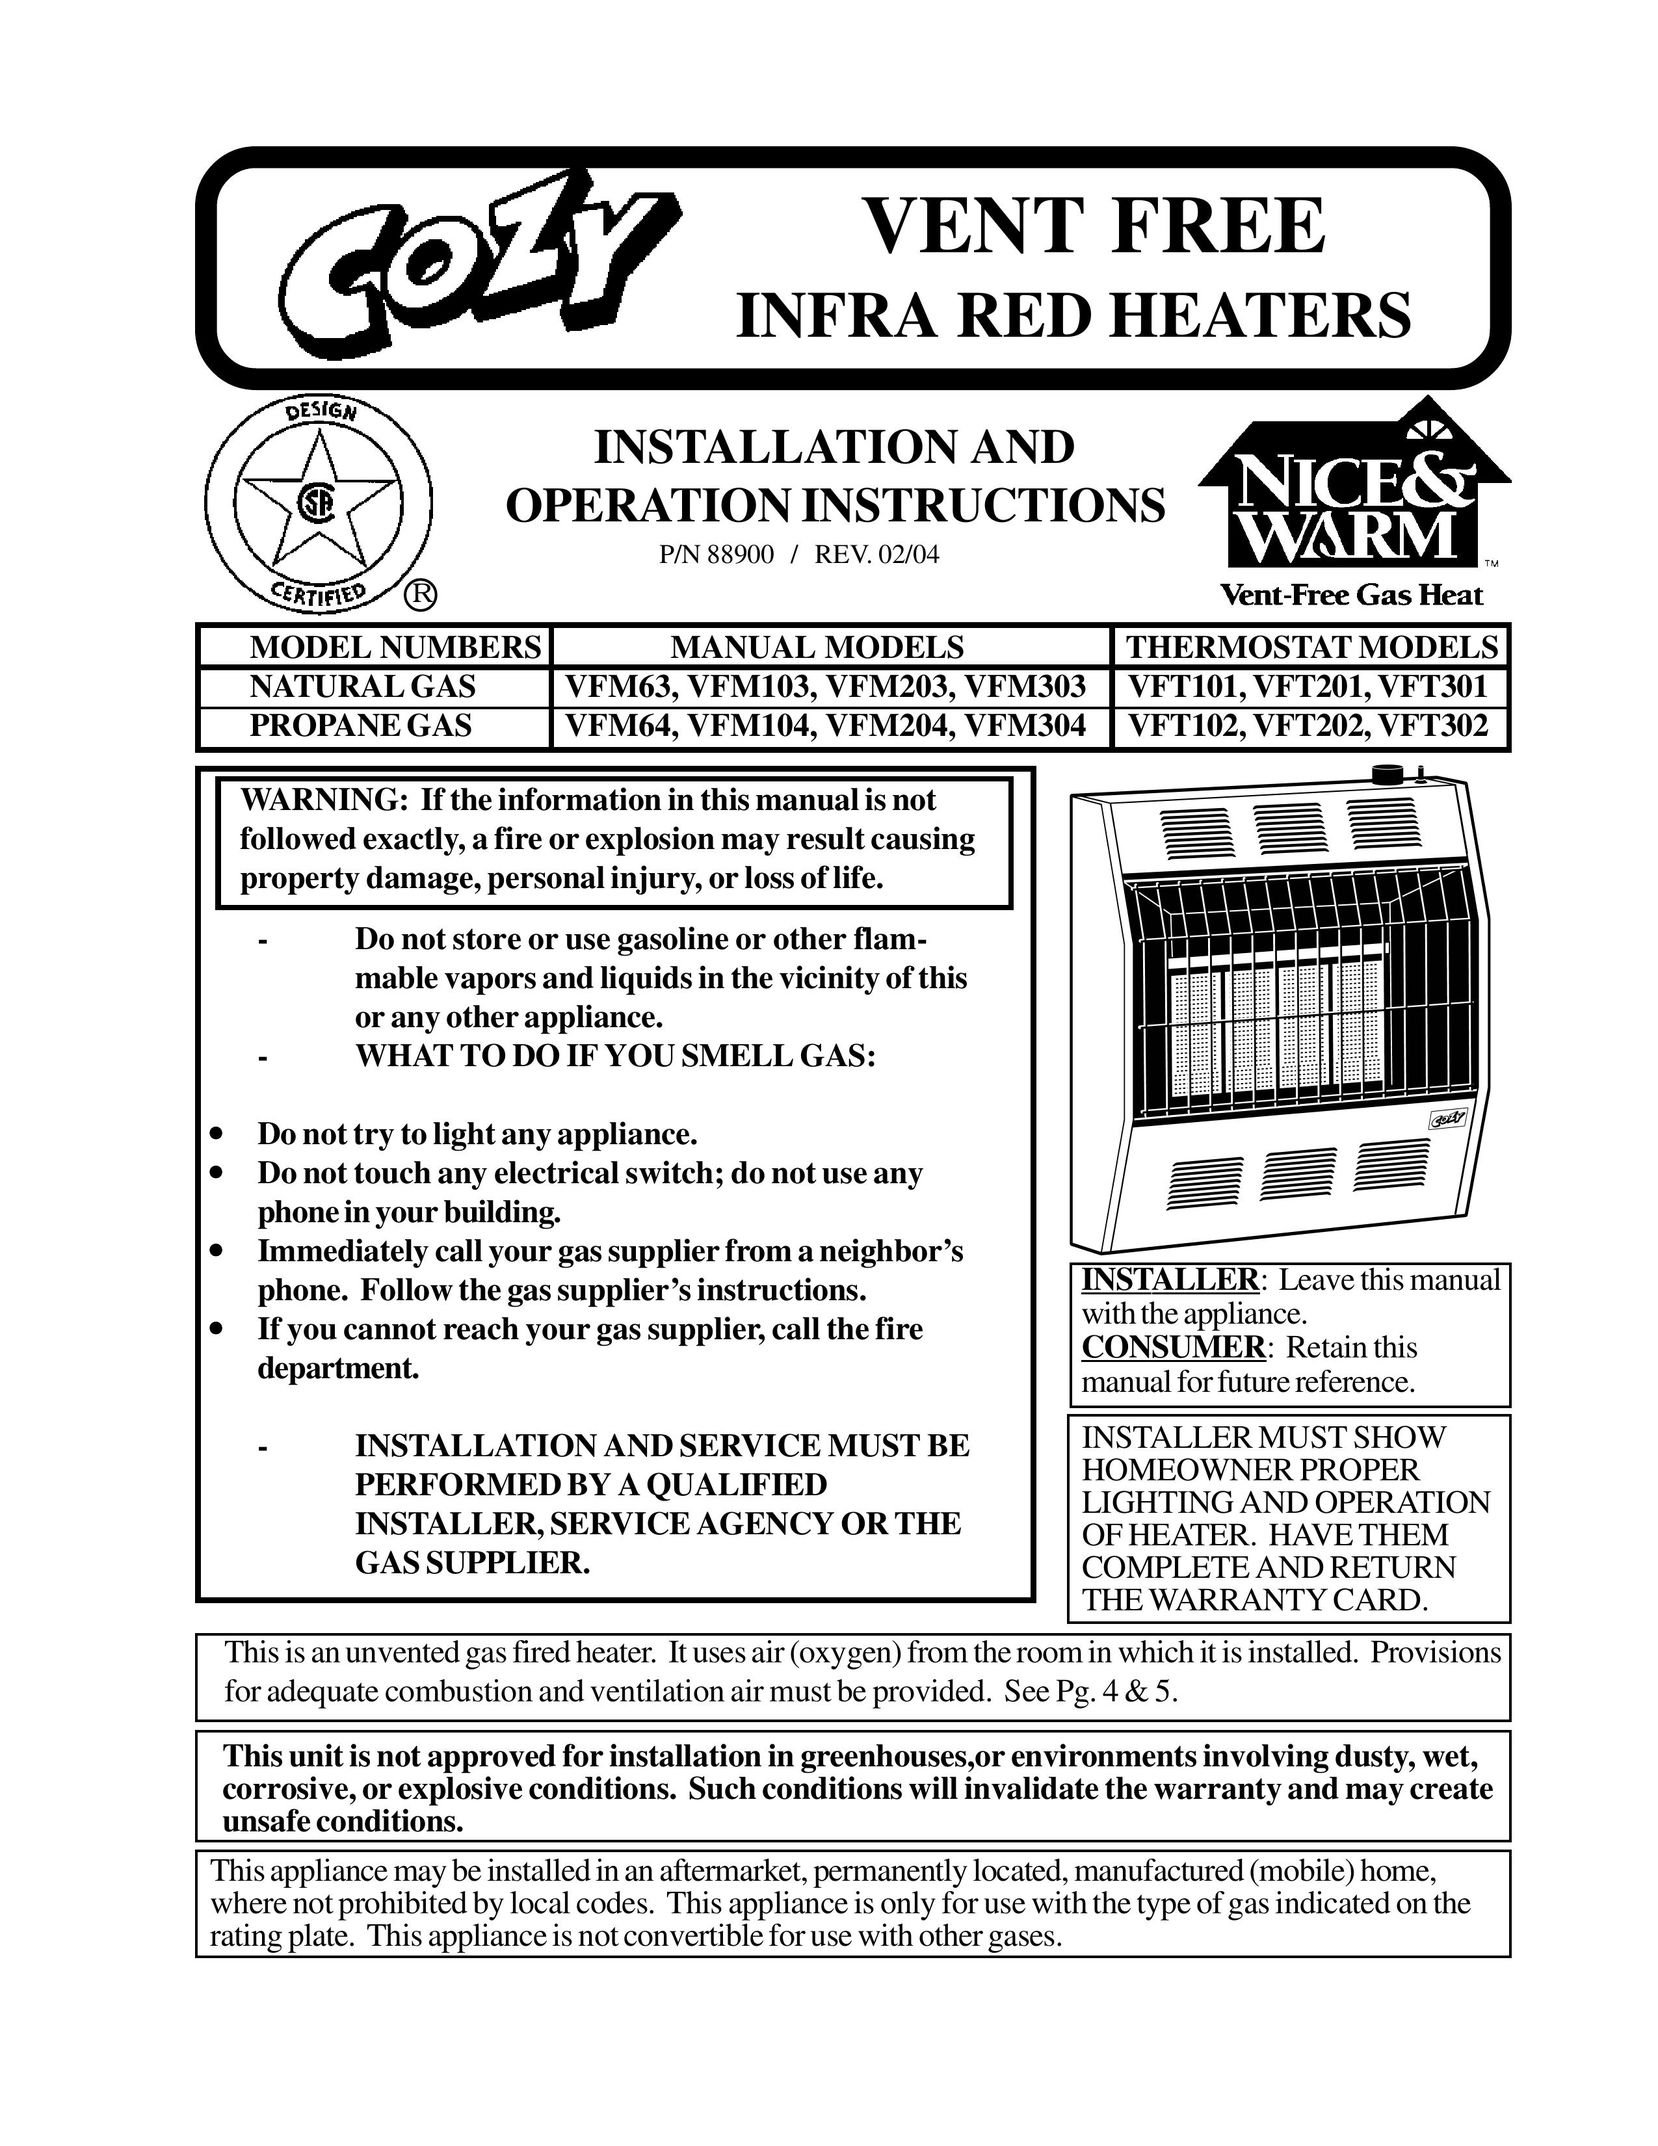 Louisville Tin and Stove VFT201 Electric Heater User Manual